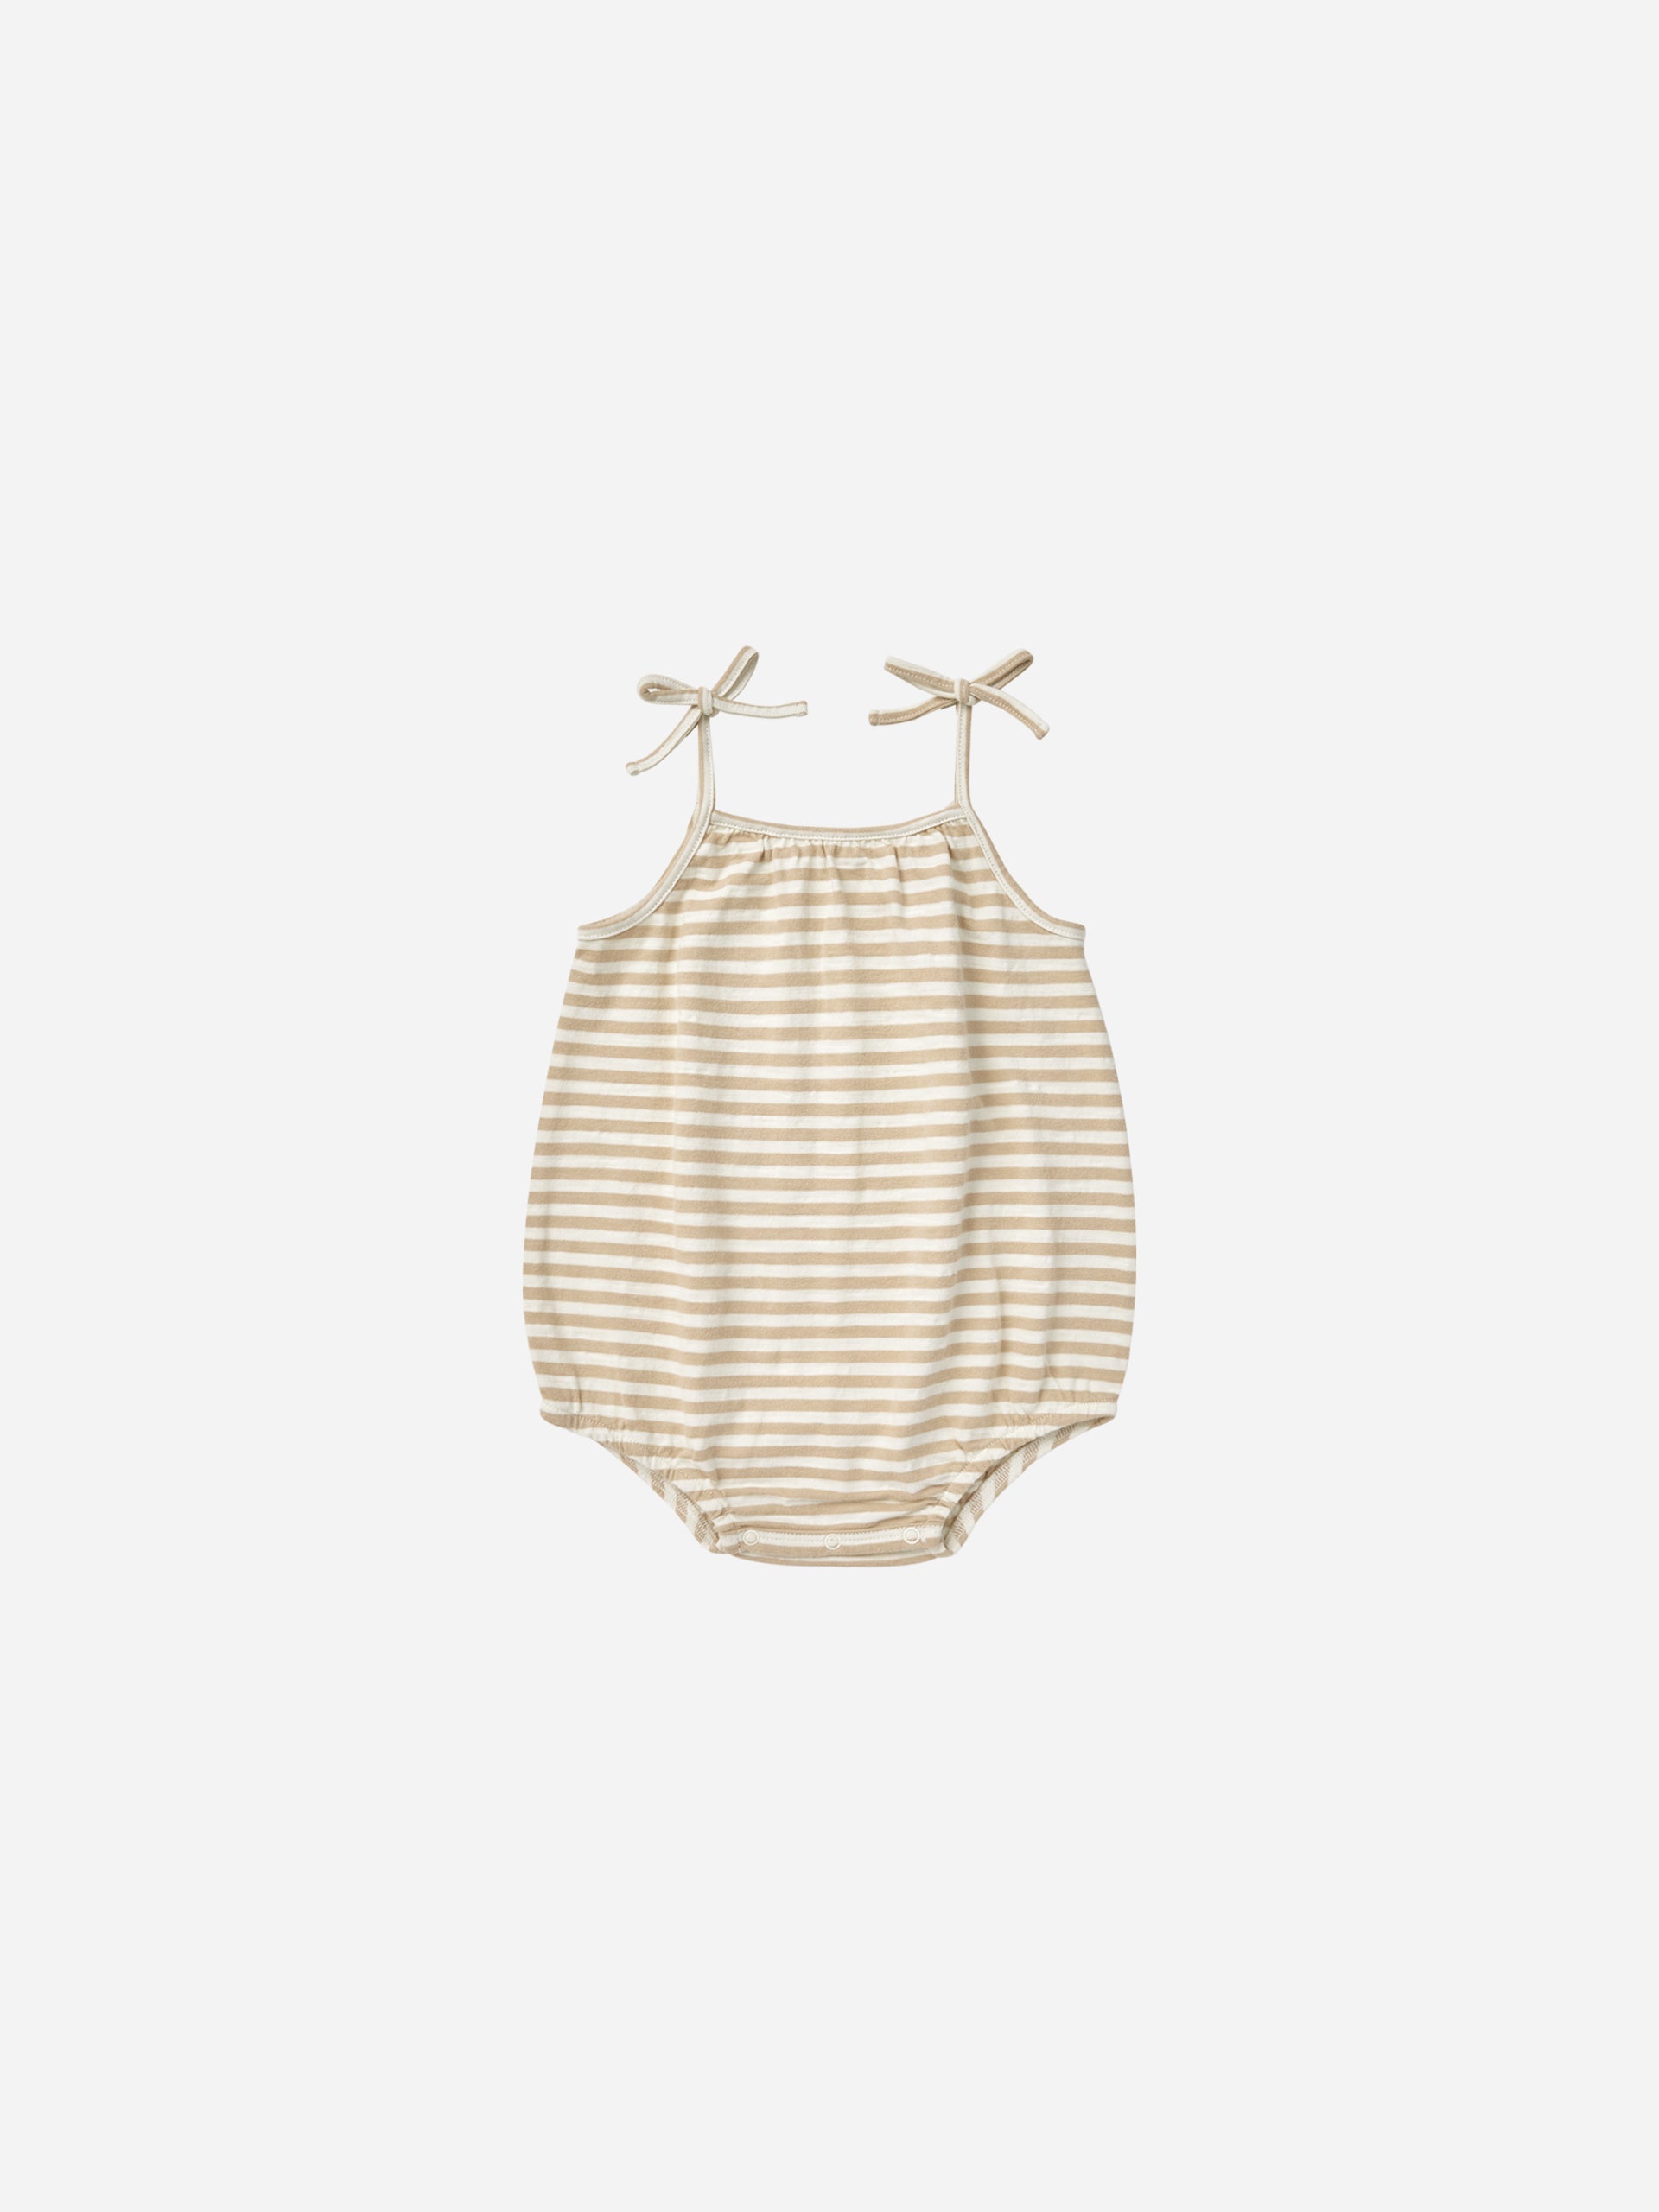 Nala Romper || Sand Stripe - Rylee + Cru | Kids Clothes | Trendy Baby Clothes | Modern Infant Outfits |